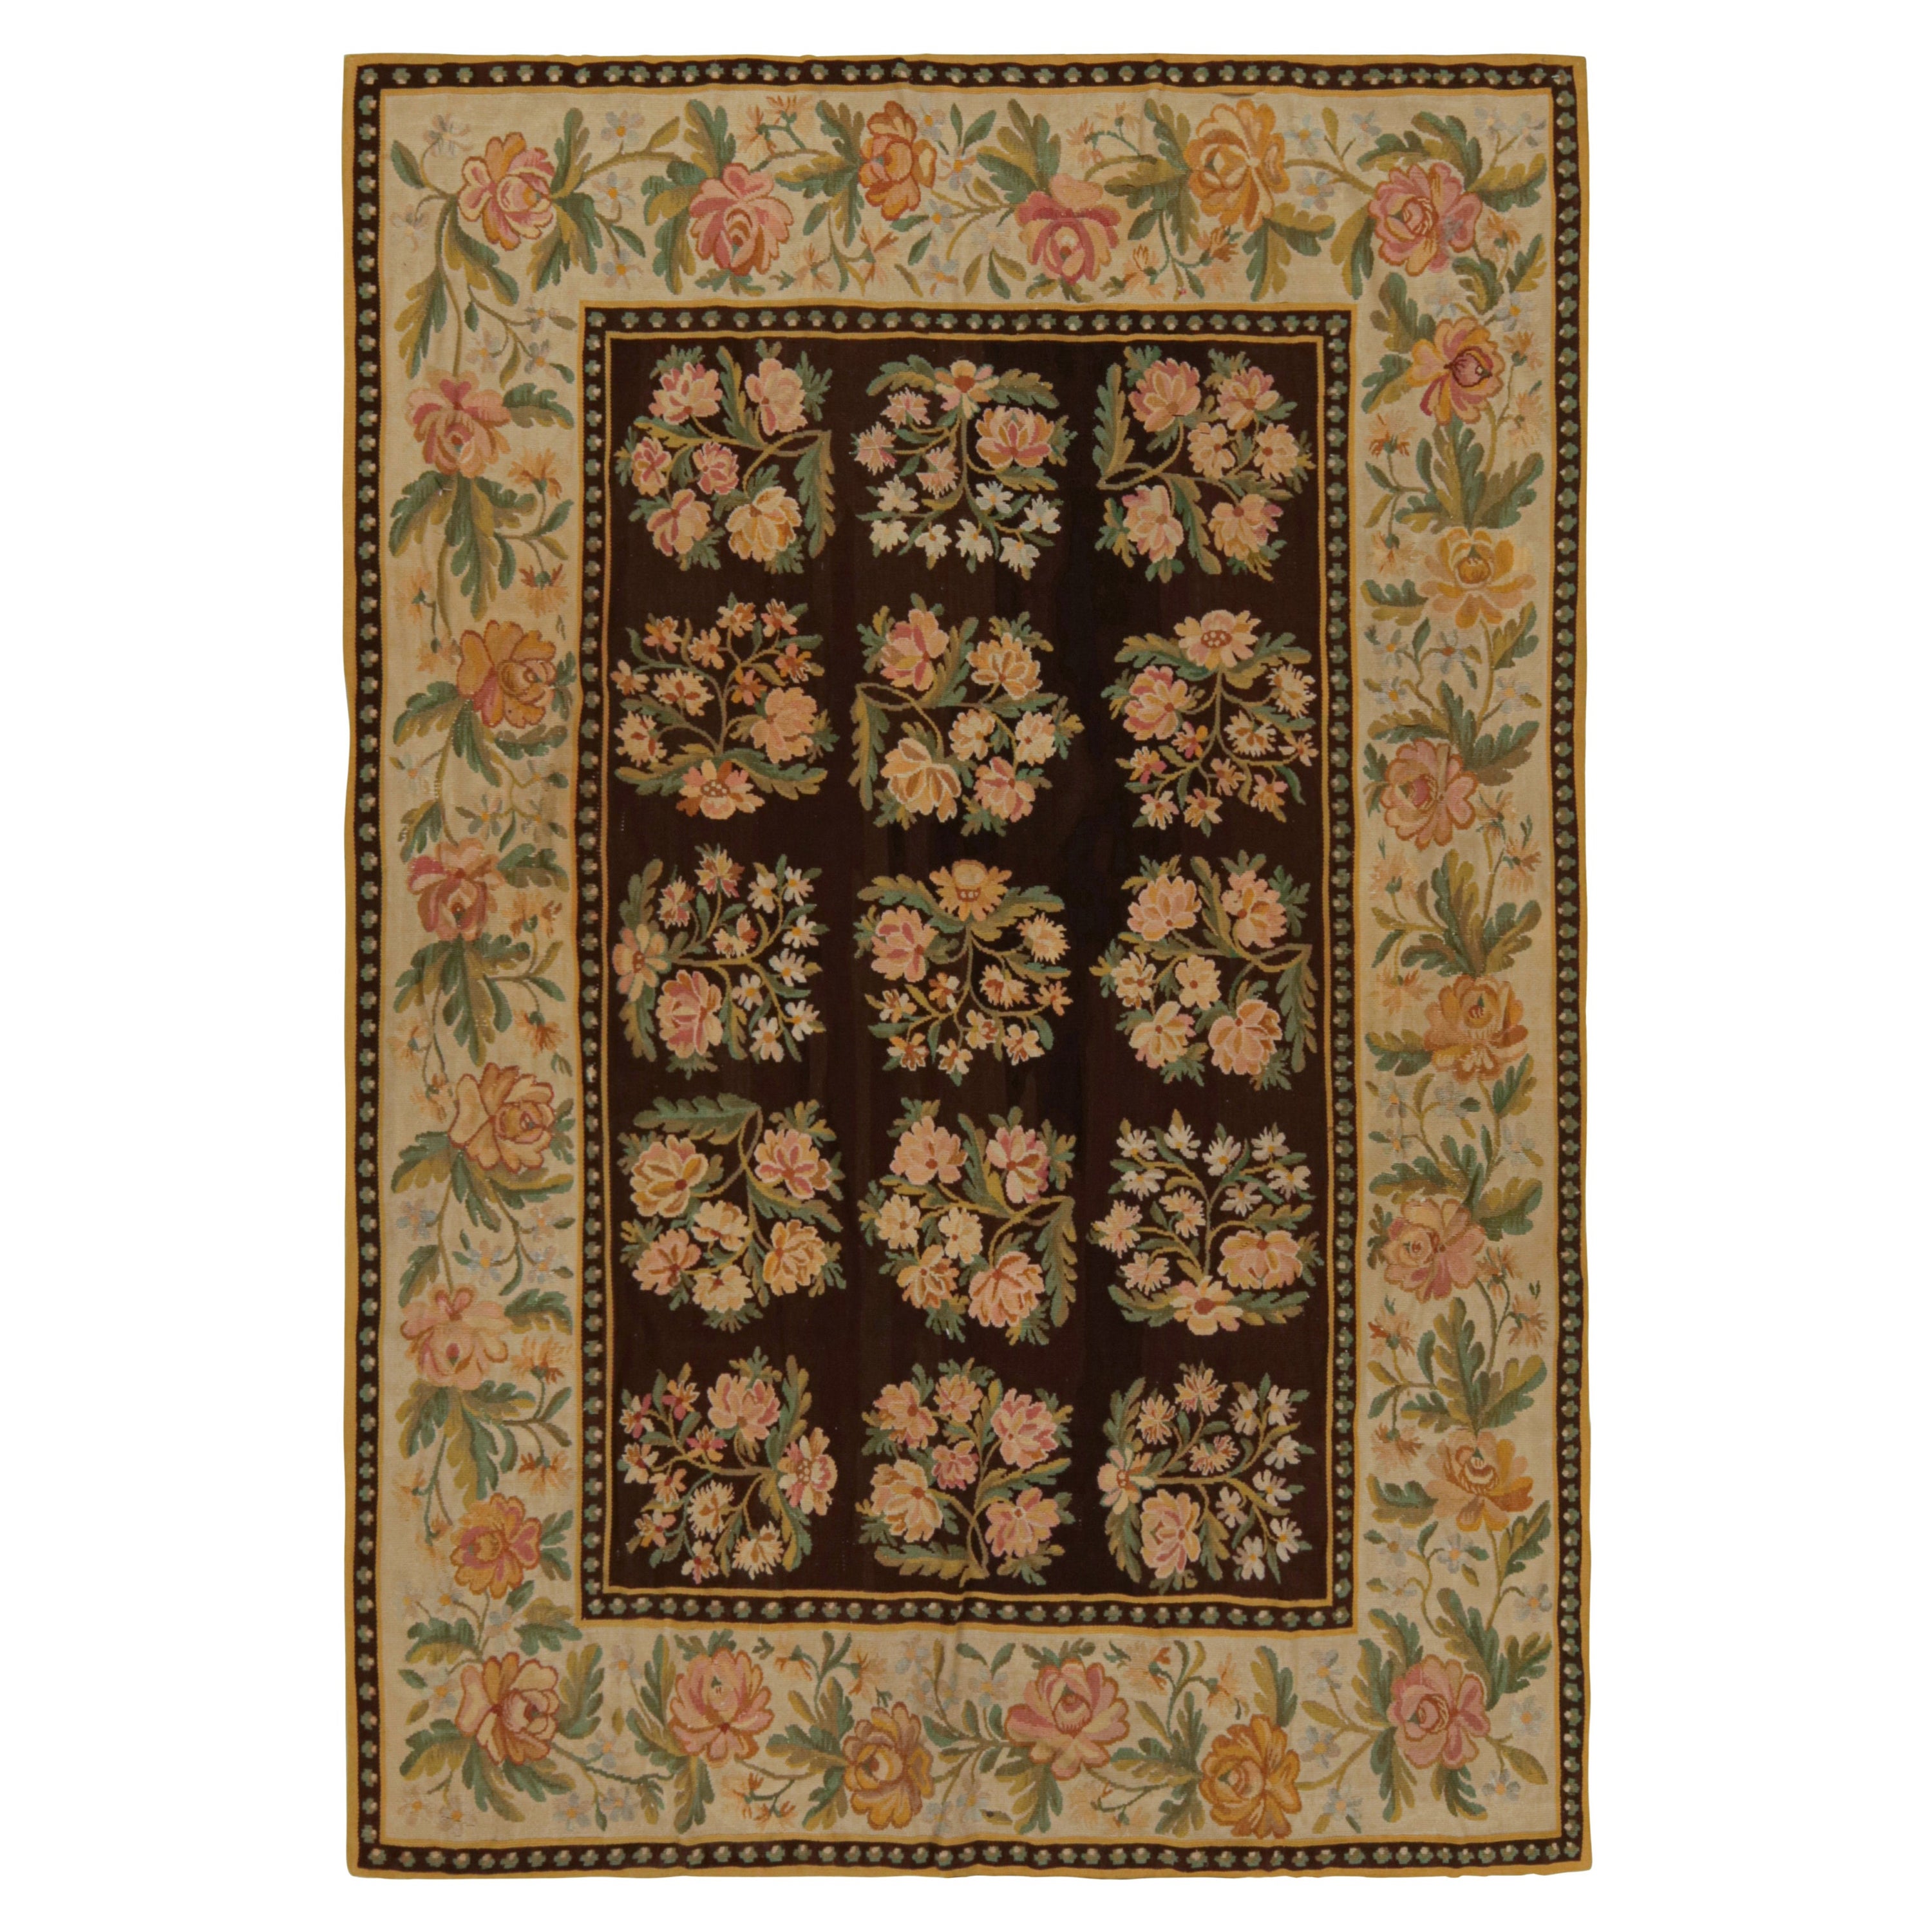 Antique Bessarabian Kilim rug in Brown with Floral Patterns from Rug & Kilim